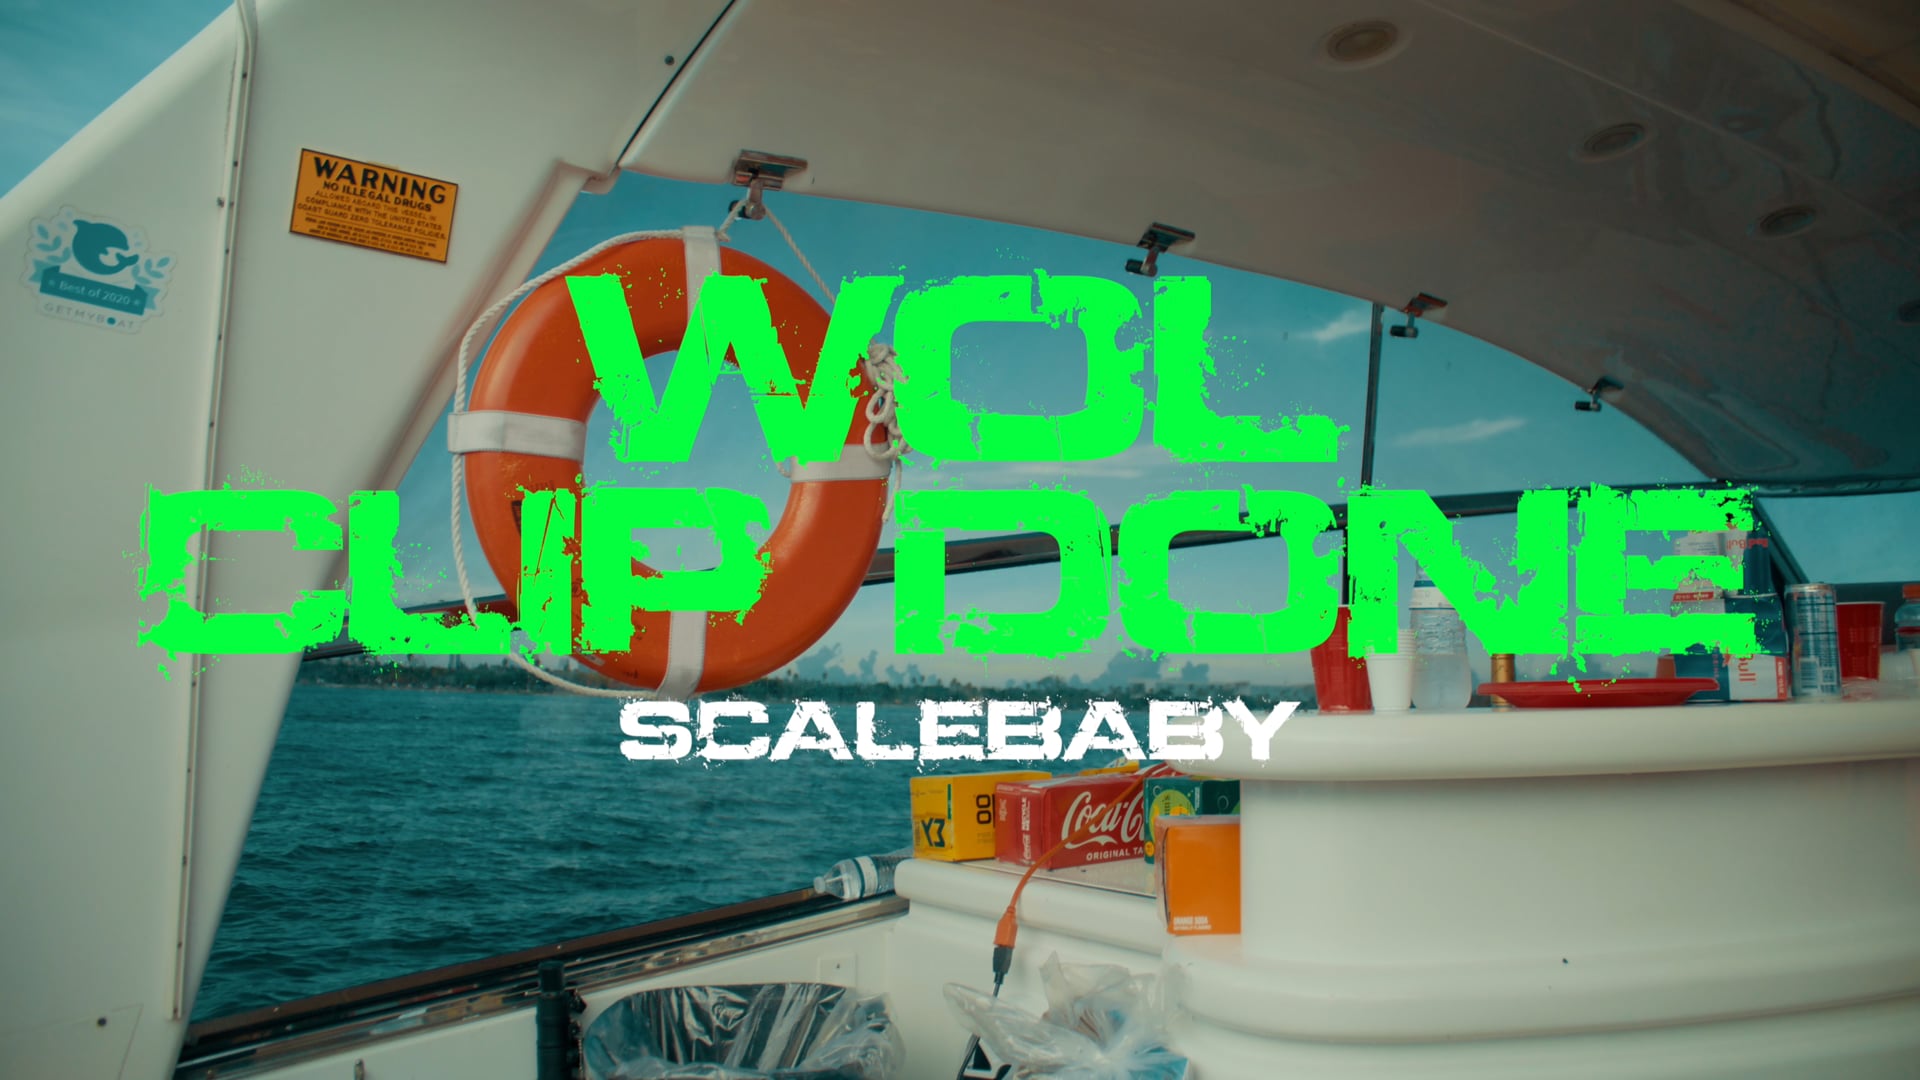 SCALEBABY - WOL CLIP DONE (2022)